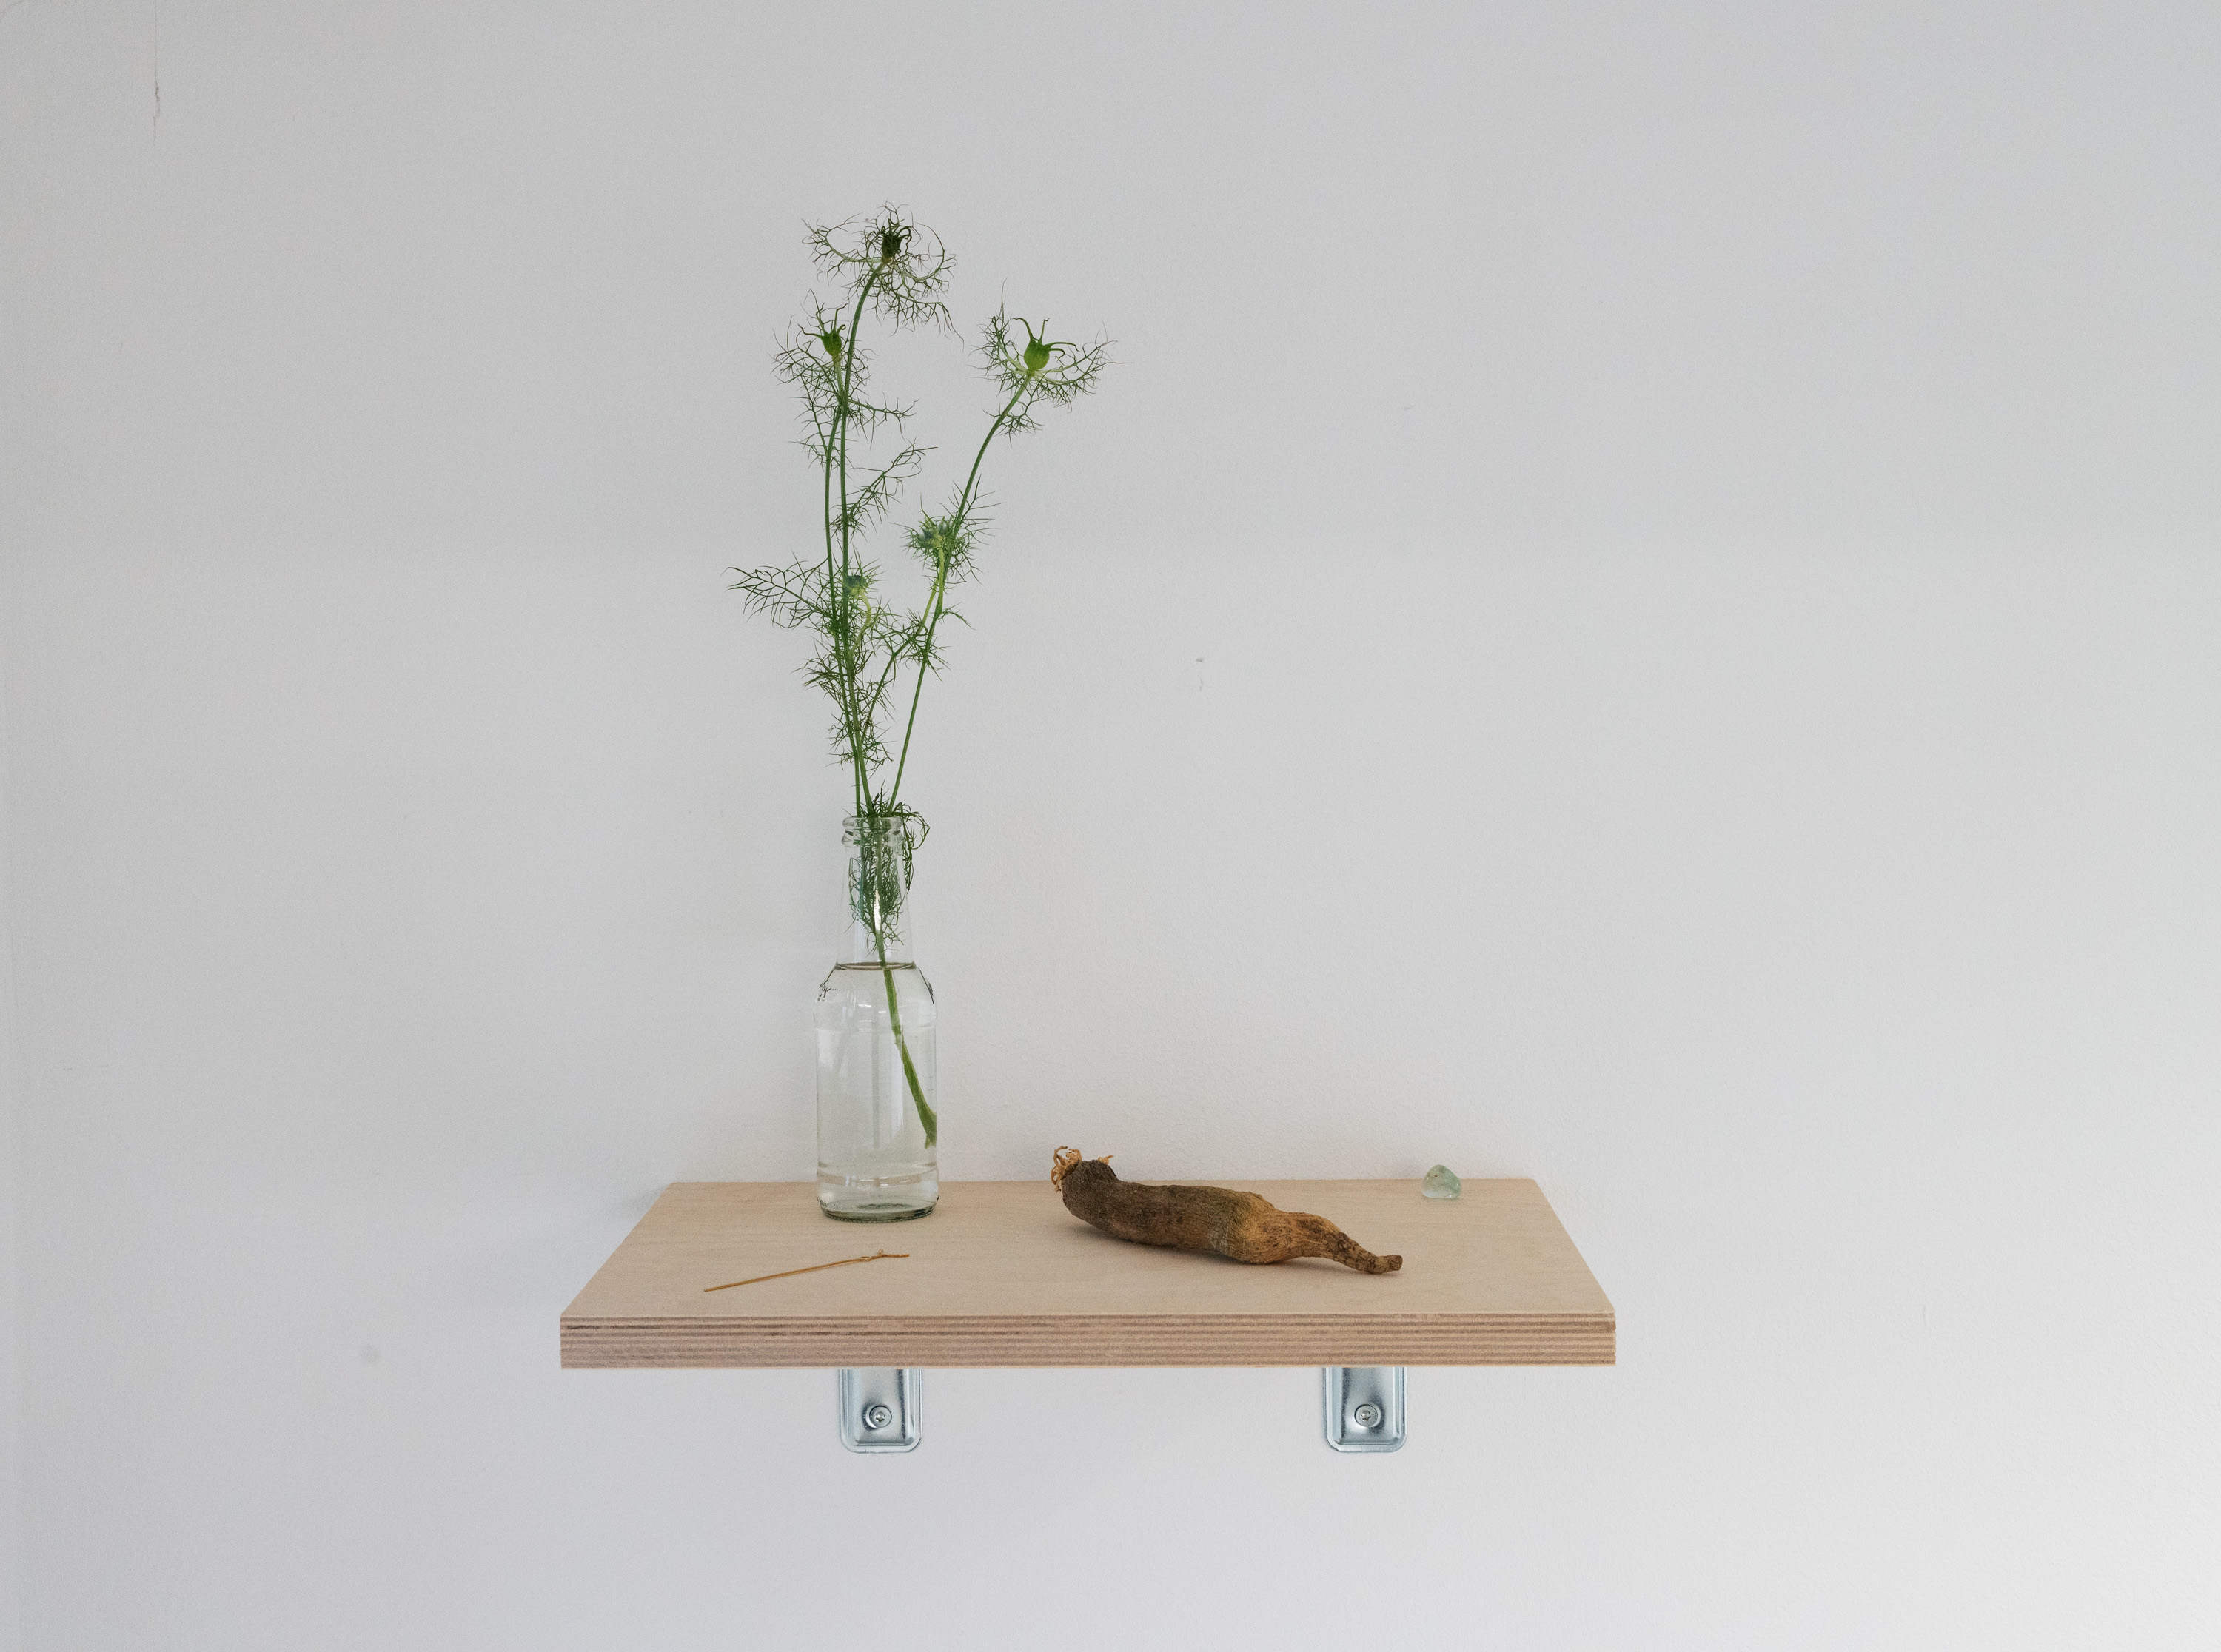 Shrine (CPH), topaz, polished brass object, fresh flower in a bottle with water and a dried up radish on plywood plate held by metal brackets, Bladr, Copenhagen, 2019